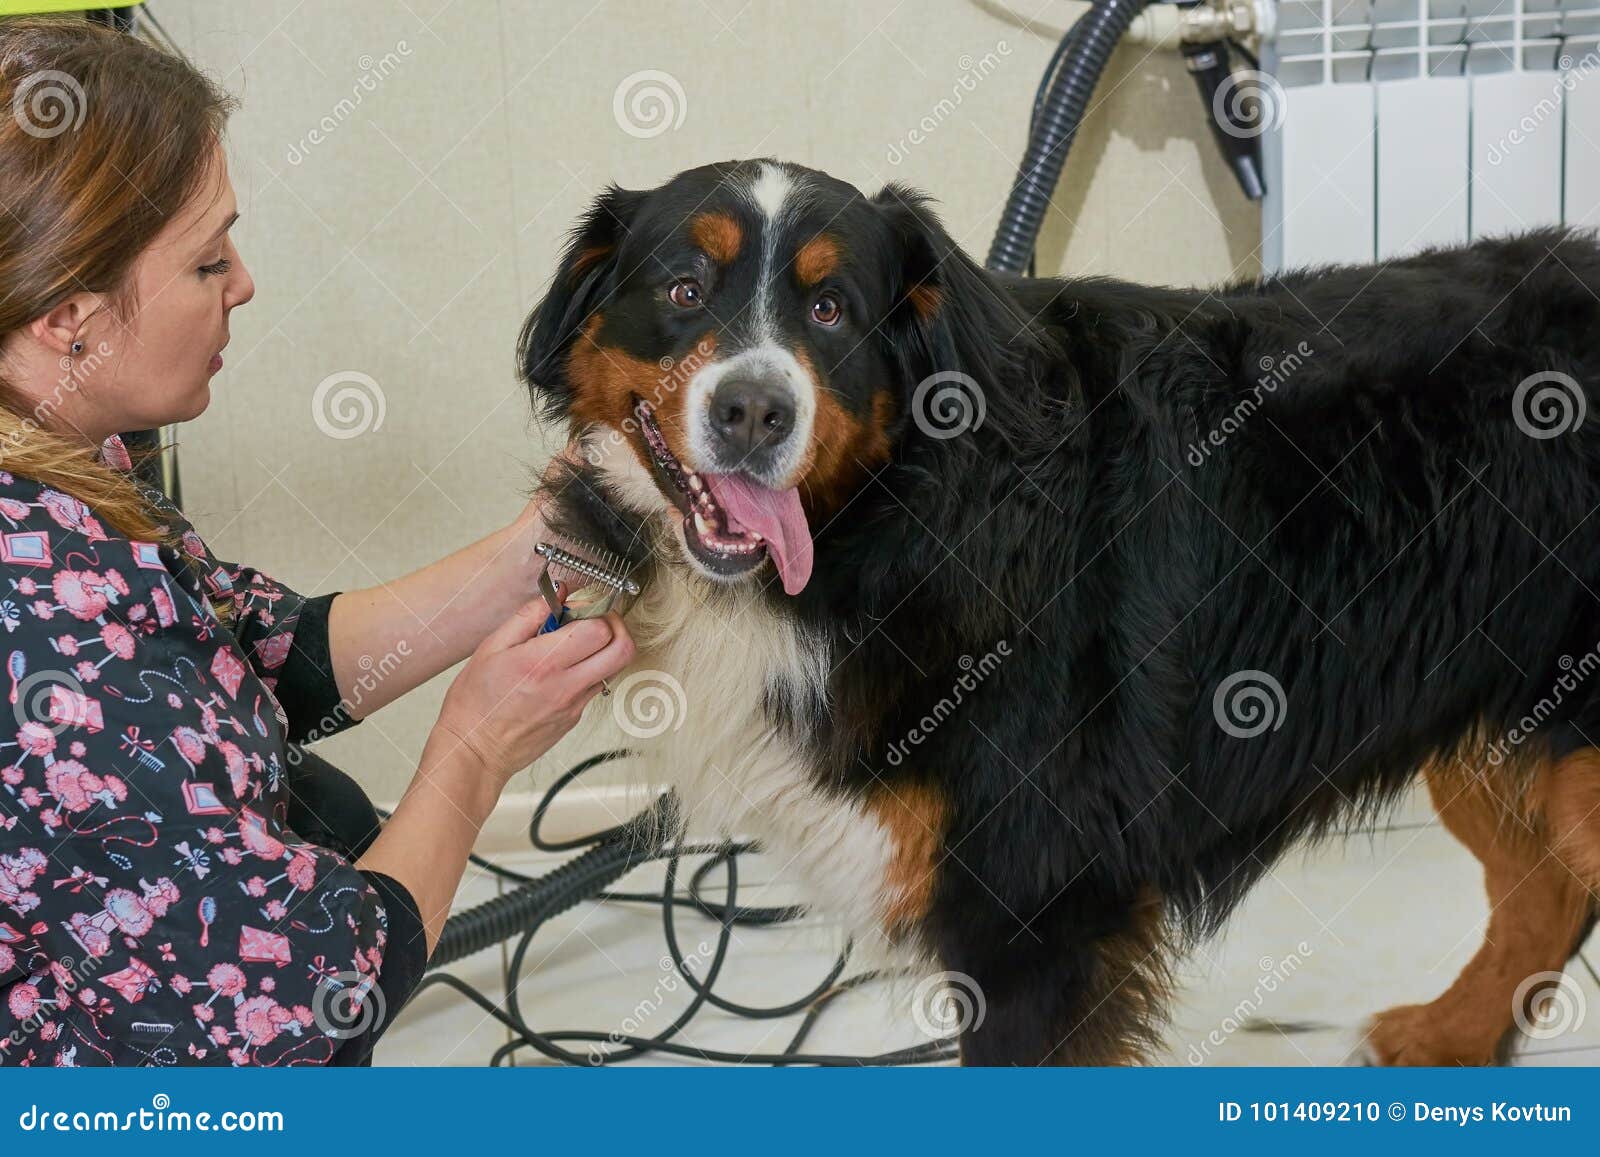 Bernese Mountain Dog Being Groomed. Stock Photo Image of